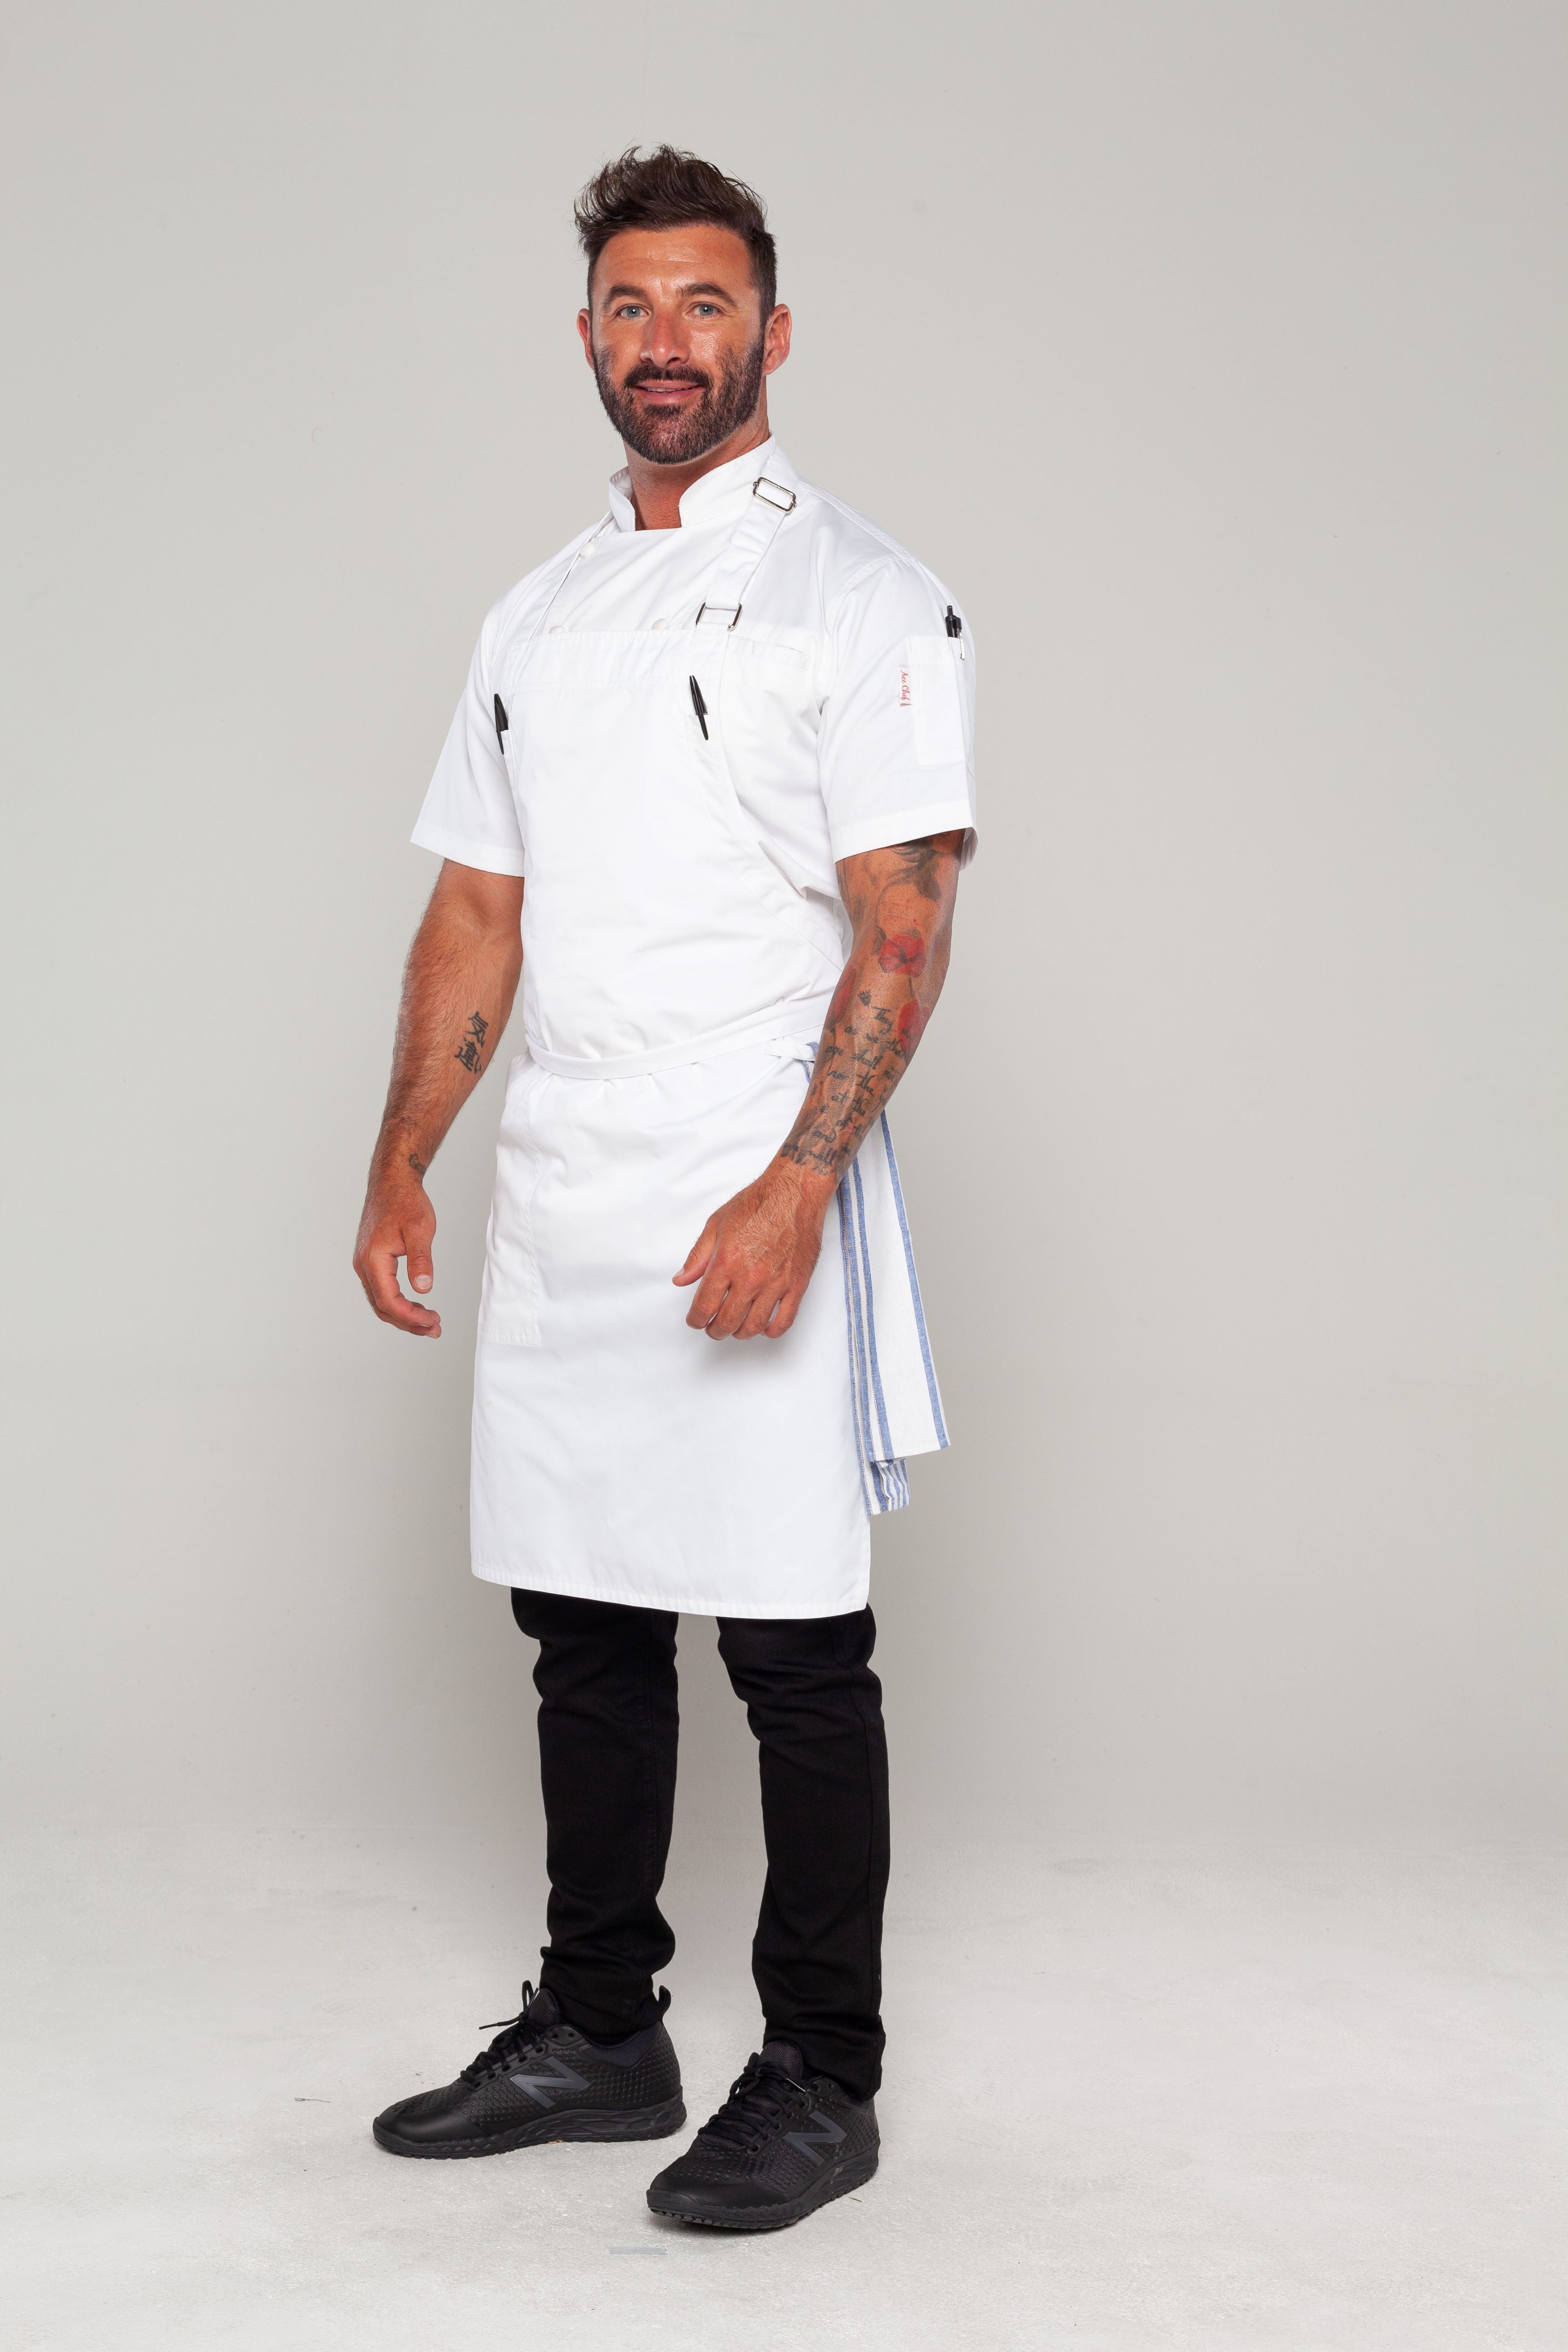 Executive Chef Trousers | Kitchen Uniforms in Egypt – We Make Uniforms